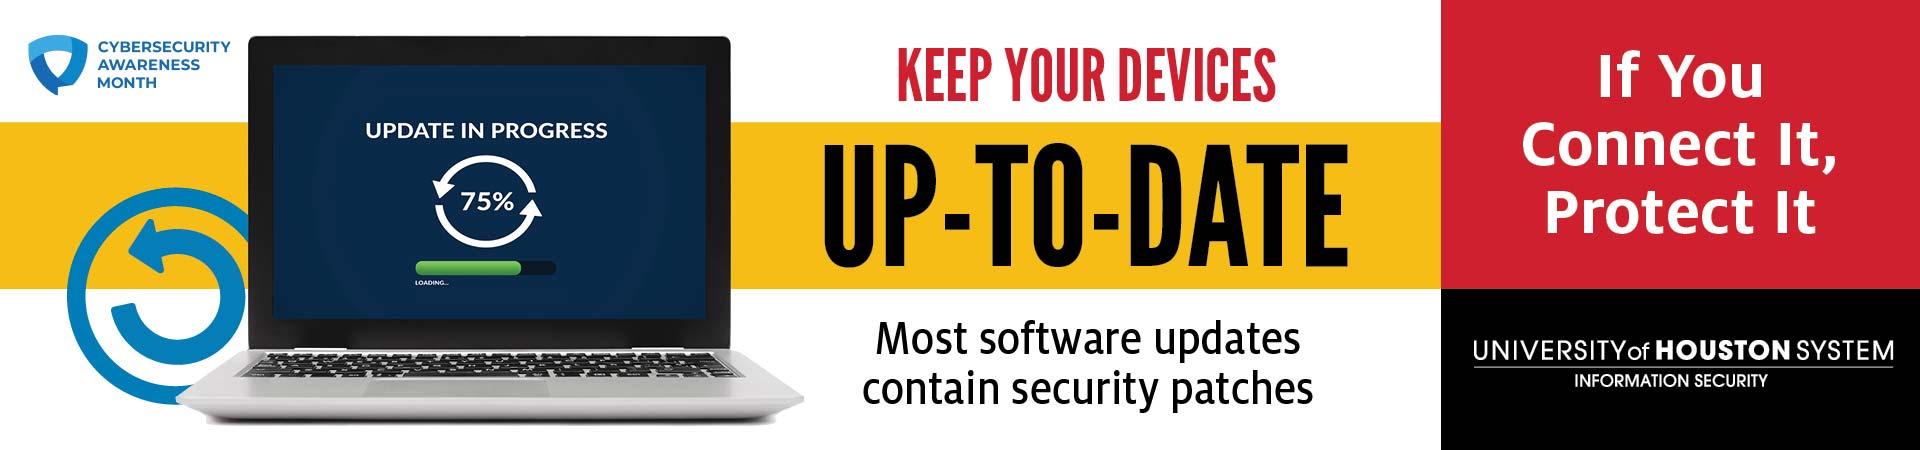 keep your devices up-to-date